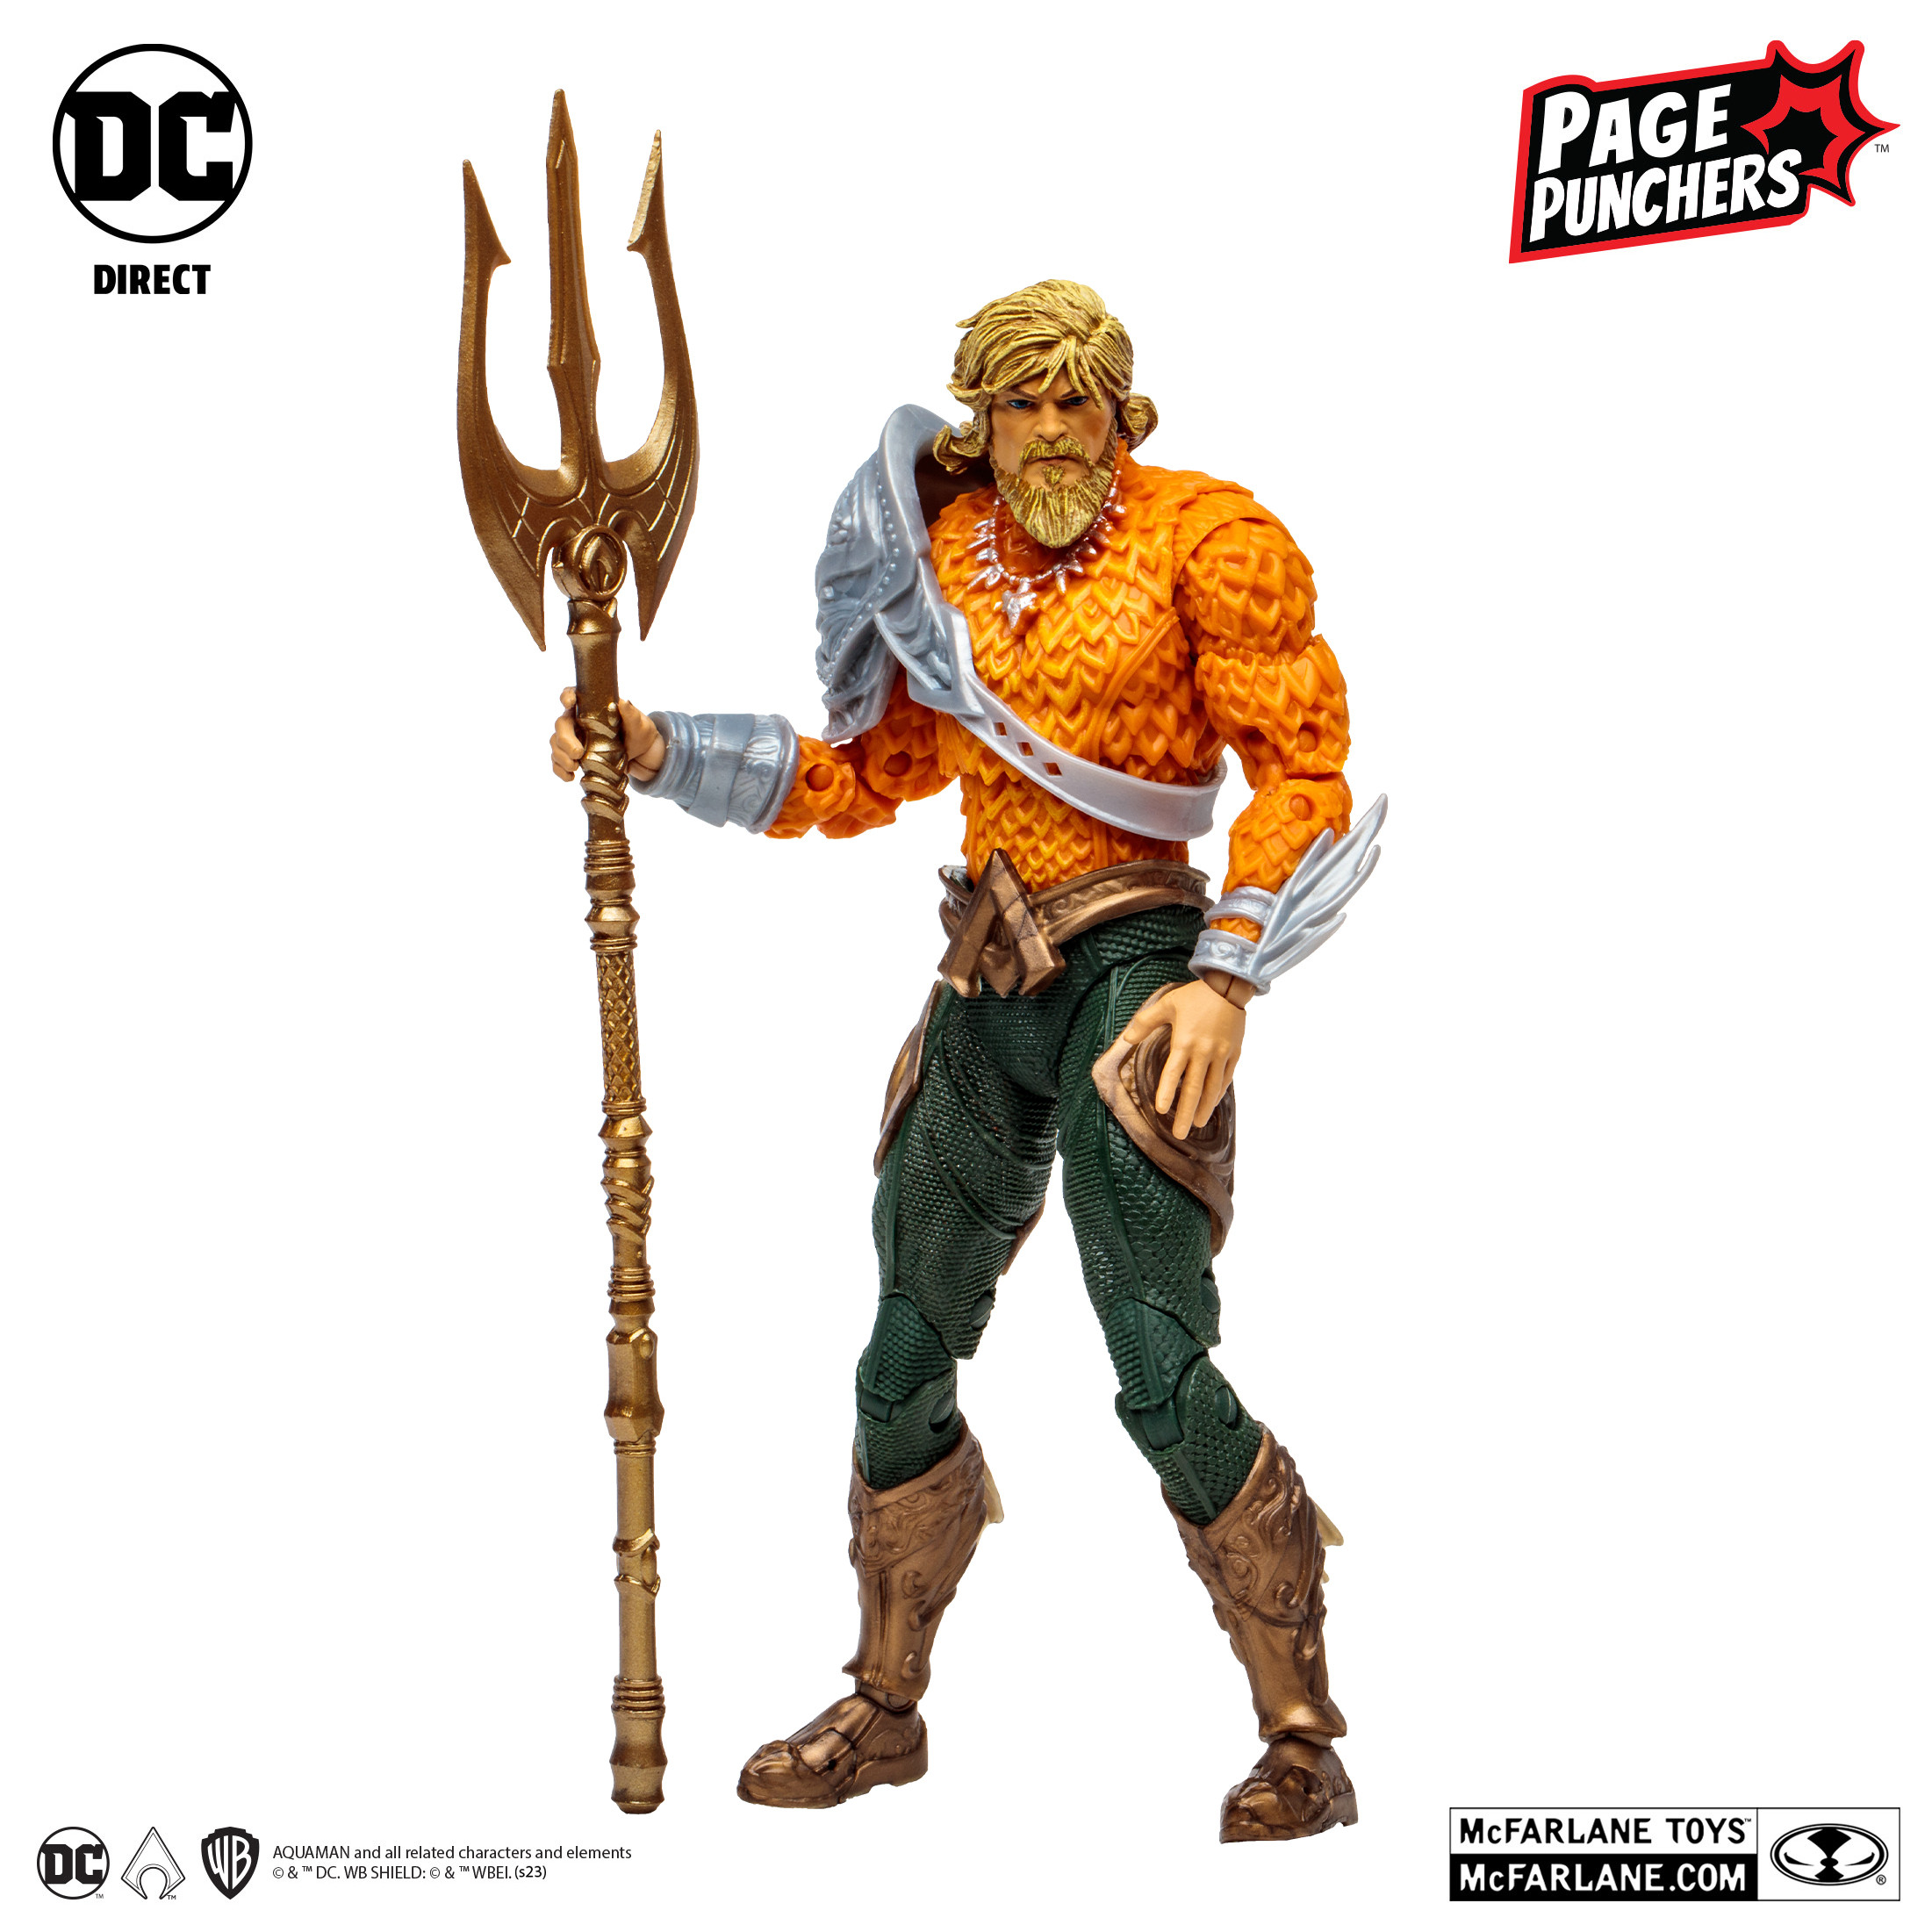 Page Puncher Aquaman - I primarily helped with engineering, articulation and minor sculpt revisions